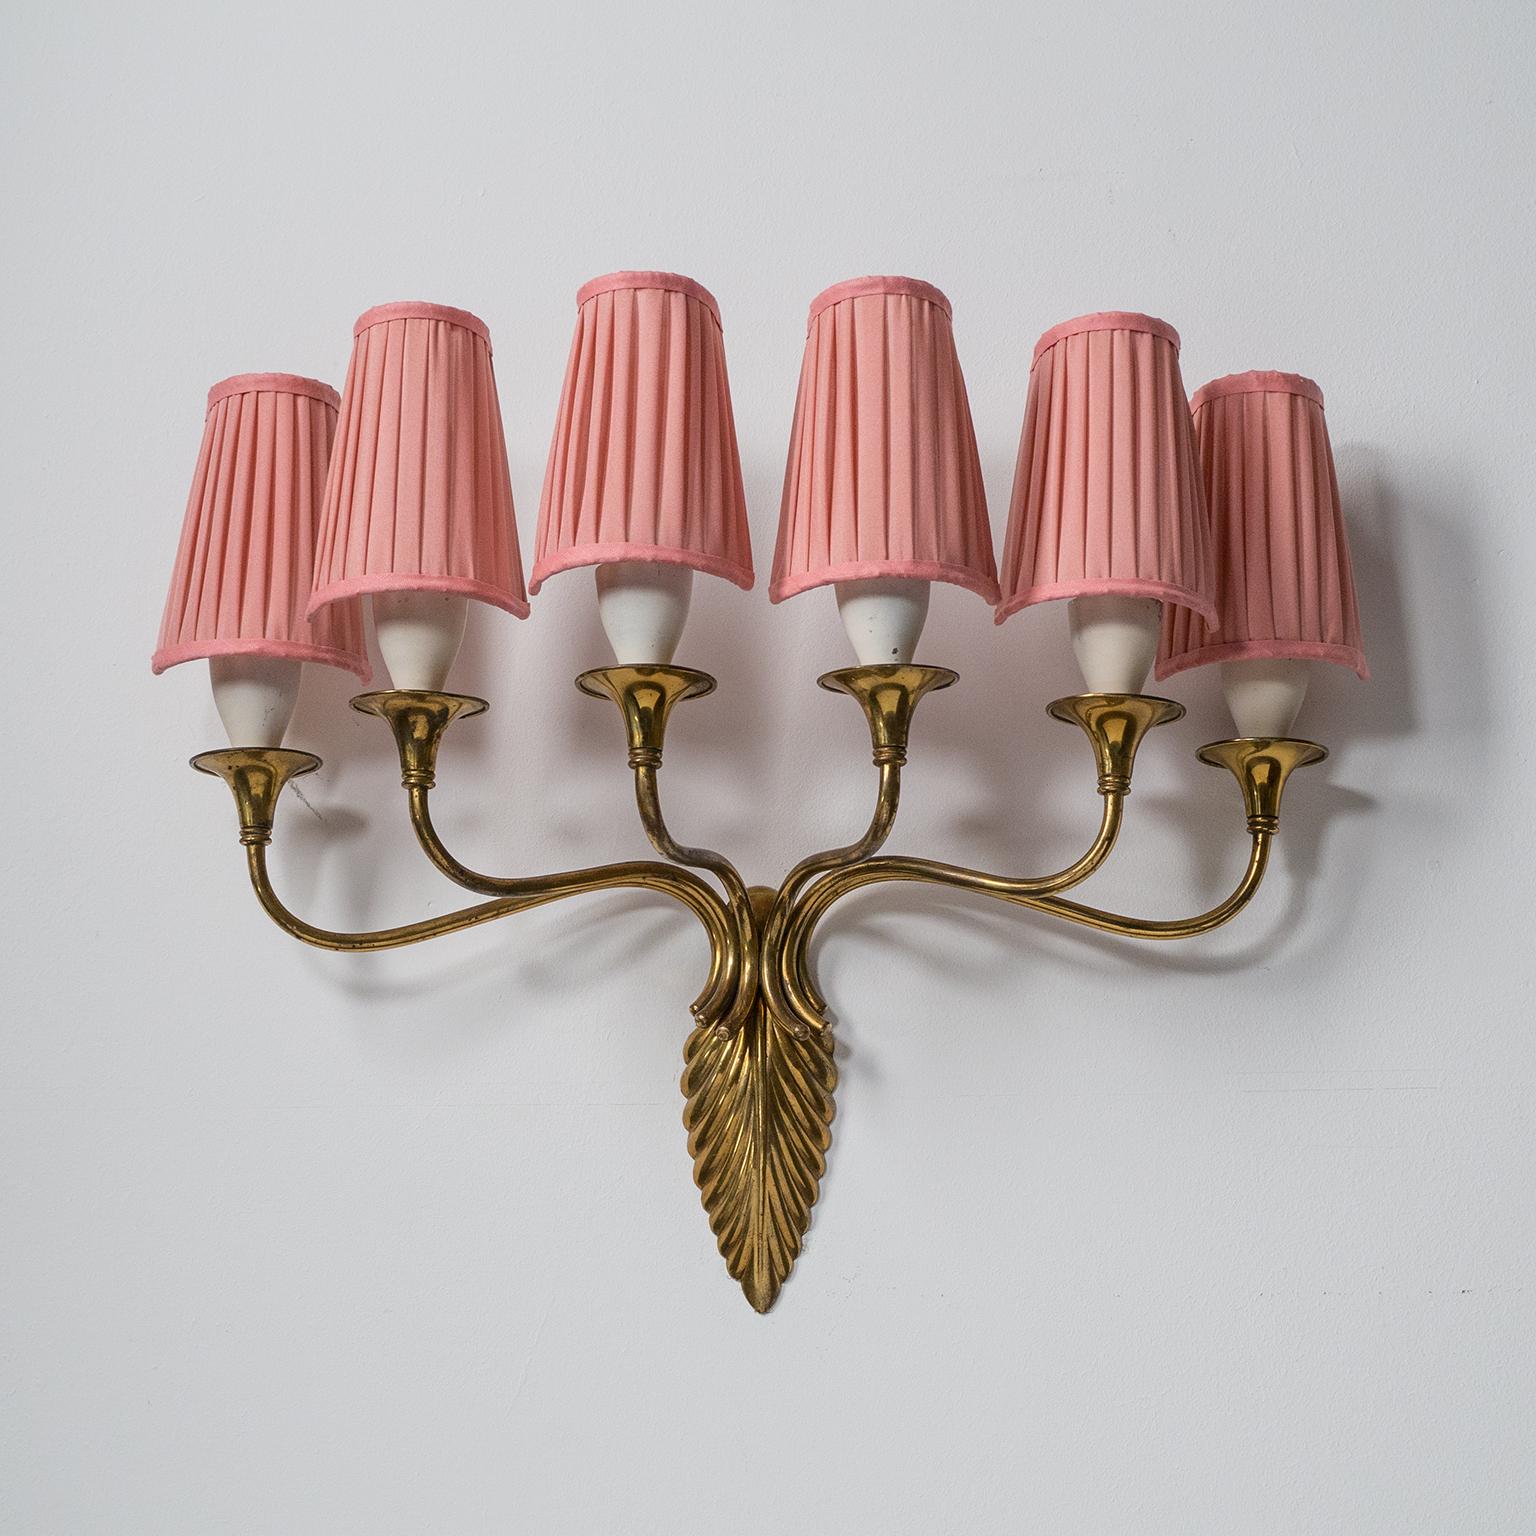 Rare six-arm Italian brass wall light from the 1940s. The leaf-shaped centerpiece is cast brass with six curved arms, each with an off-white lacquered socket cover. Good original condition with patina on the brass and some wear to the original